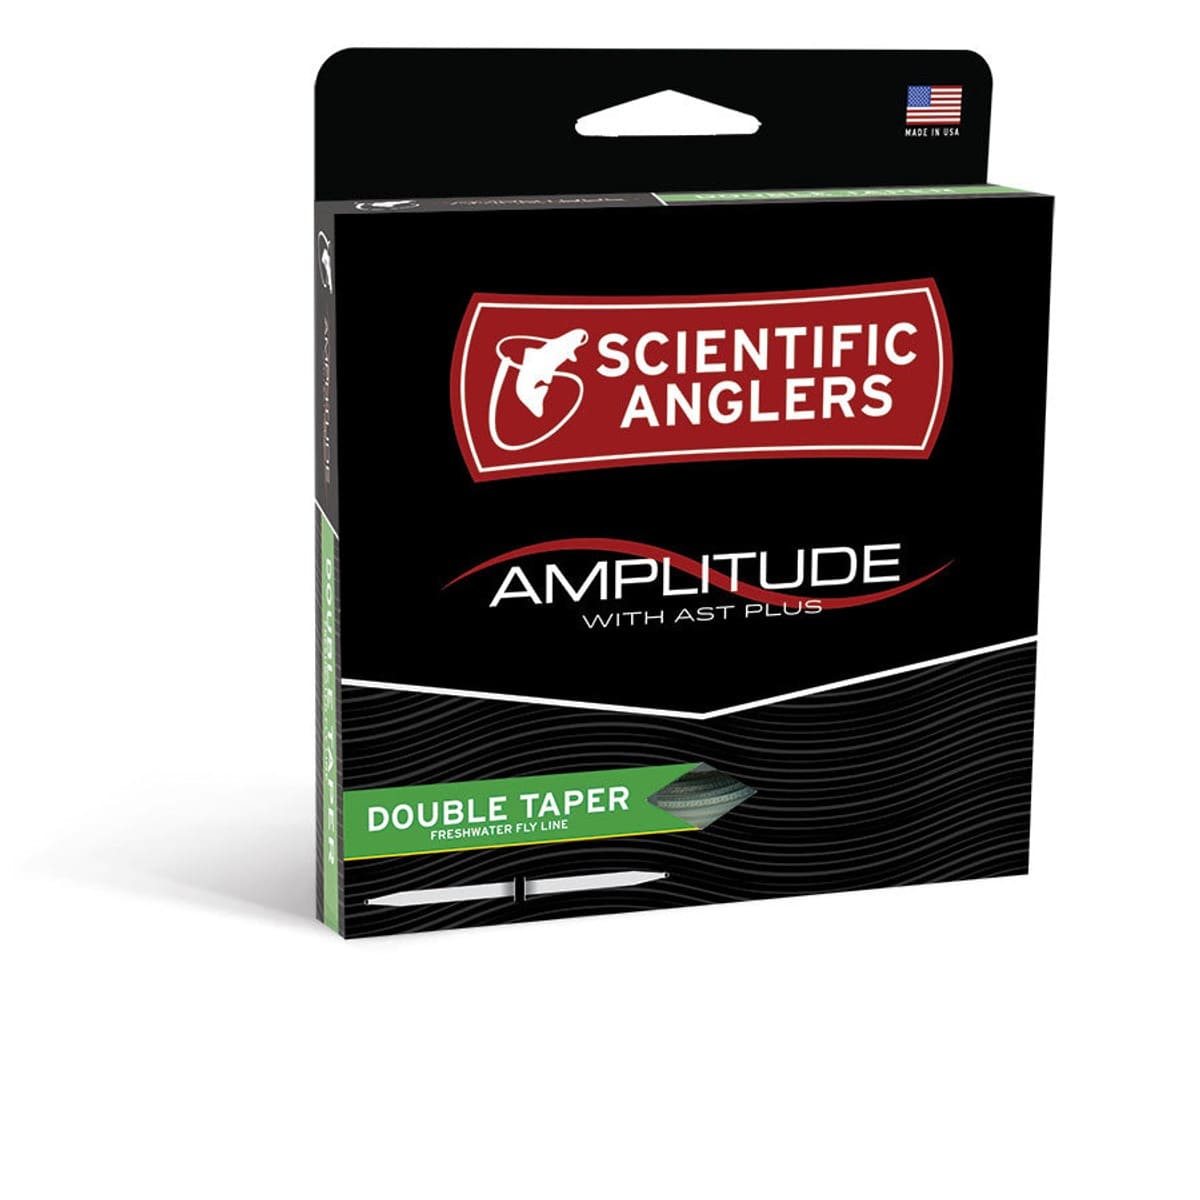 Scientific Anglers Double Taper Textured Fly Line